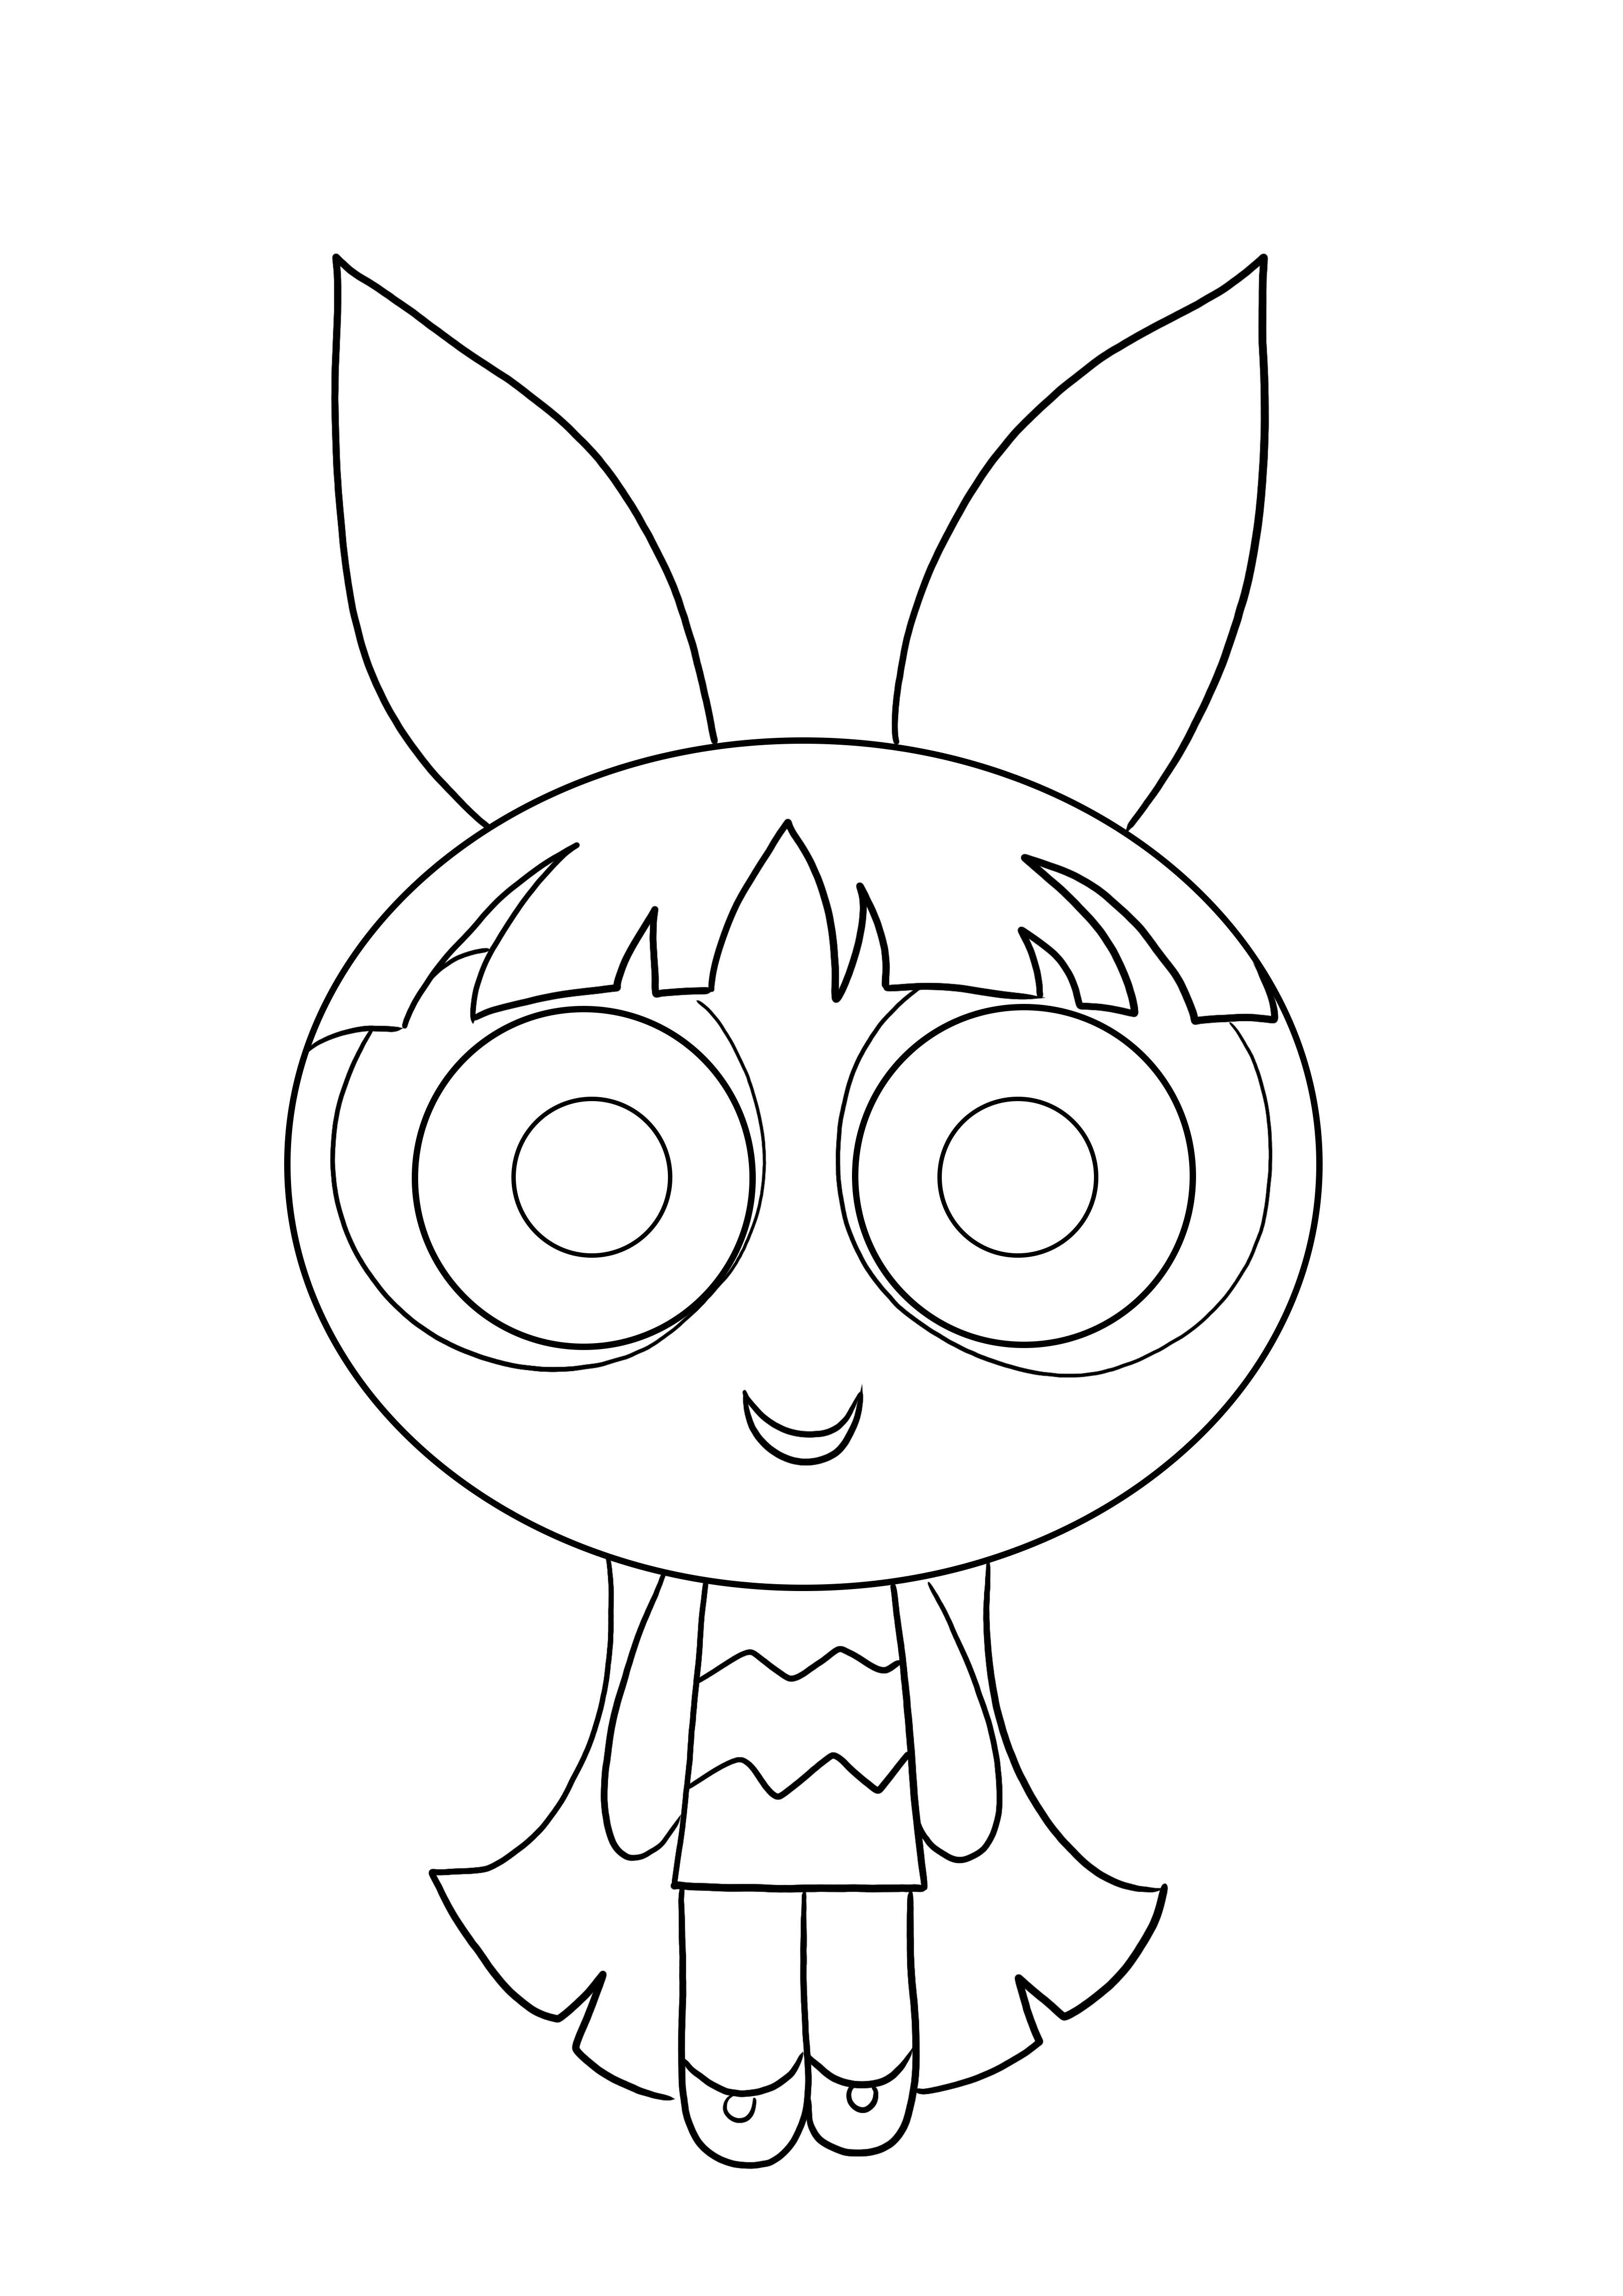 Blossom from Powerpuff Girls-free for printing and coloring for kids